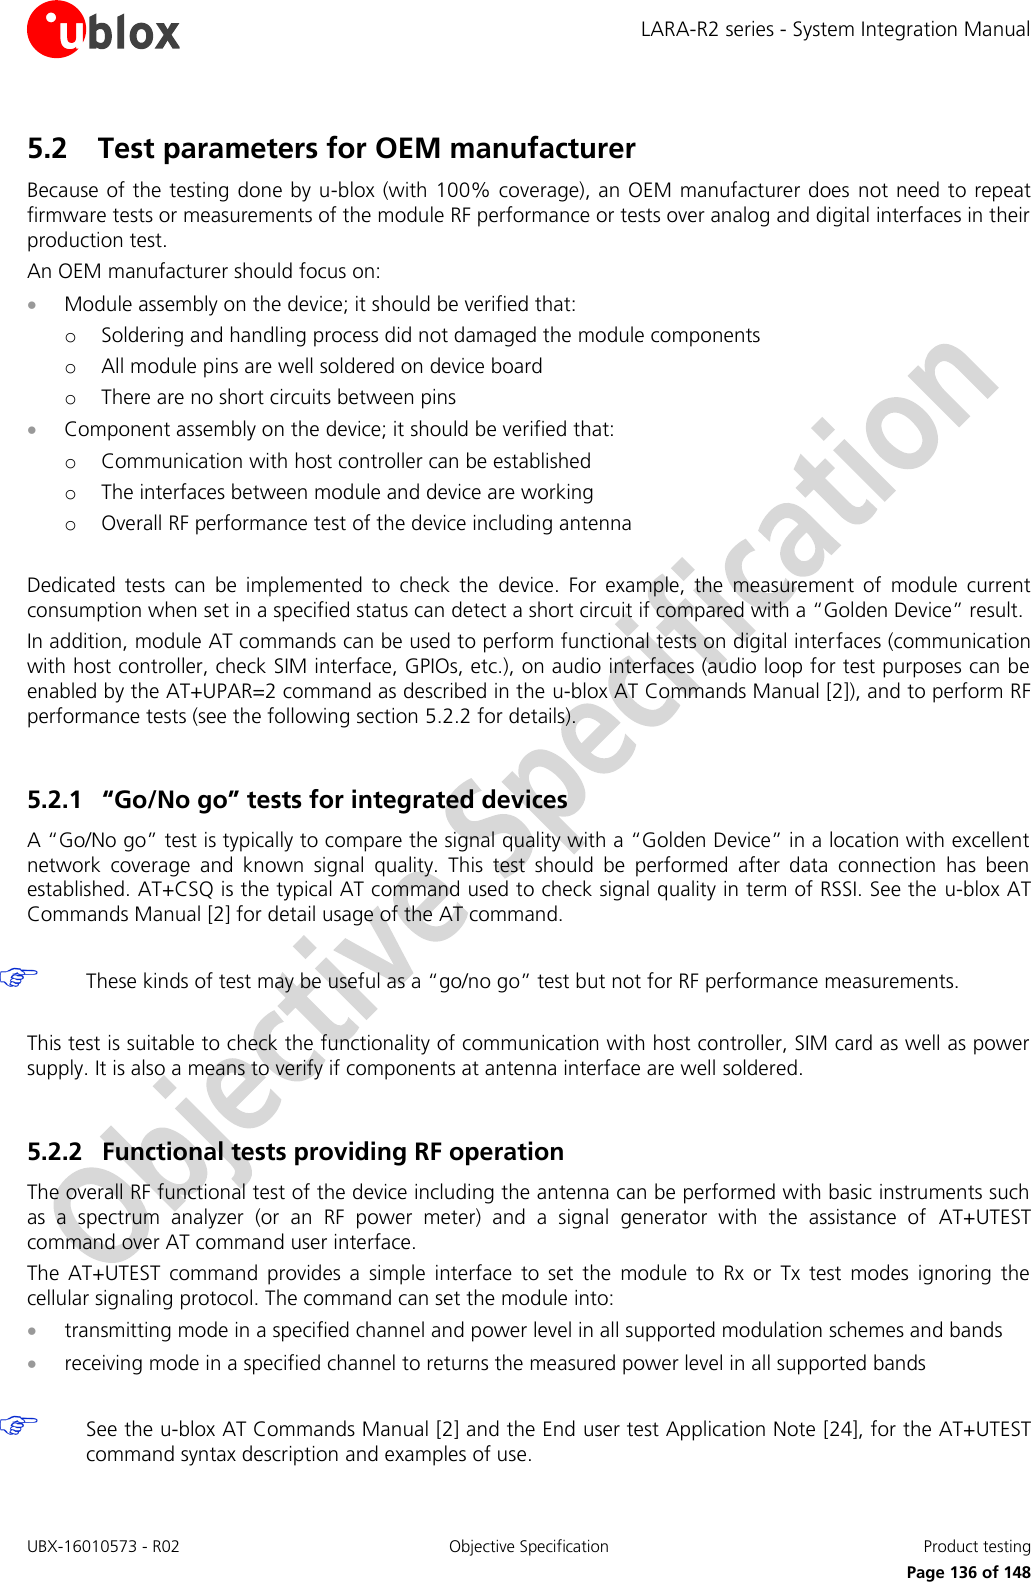 LARA-R2 series - System Integration Manual UBX-16010573 - R02  Objective Specification  Product testing     Page 136 of 148 5.2 Test parameters for OEM manufacturer Because of the testing done by u-blox (with 100% coverage), an OEM manufacturer does not need to repeat firmware tests or measurements of the module RF performance or tests over analog and digital interfaces in their production test. An OEM manufacturer should focus on:  Module assembly on the device; it should be verified that: o Soldering and handling process did not damaged the module components o All module pins are well soldered on device board o There are no short circuits between pins  Component assembly on the device; it should be verified that: o Communication with host controller can be established o The interfaces between module and device are working o Overall RF performance test of the device including antenna  Dedicated  tests  can  be  implemented  to  check  the  device.  For  example,  the  measurement  of  module  current consumption when set in a specified status can detect a short circuit if compared with a “Golden Device” result. In addition, module AT commands can be used to perform functional tests on digital interfaces (communication with host controller, check SIM interface, GPIOs, etc.), on audio interfaces (audio loop for test purposes can be enabled by the AT+UPAR=2 command as described in the u-blox AT Commands Manual [2]), and to perform RF performance tests (see the following section 5.2.2 for details).  5.2.1 “Go/No go” tests for integrated devices A “Go/No go” test is typically to compare the signal quality with a “Golden Device” in a location with excellent network  coverage  and  known  signal  quality.  This  test  should  be  performed  after  data  connection  has  been established. AT+CSQ is the typical AT command used to check signal quality in term of RSSI. See the u-blox AT Commands Manual [2] for detail usage of the AT command.    These kinds of test may be useful as a “go/no go” test but not for RF performance measurements.  This test is suitable to check the functionality of communication with host controller, SIM card as well as power supply. It is also a means to verify if components at antenna interface are well soldered.  5.2.2 Functional tests providing RF operation The overall RF functional test of the device including the antenna can be performed with basic instruments such as  a  spectrum  analyzer  (or  an  RF  power  meter)  and  a  signal  generator  with  the  assistance  of  AT+UTEST command over AT command user interface. The  AT+UTEST  command  provides  a  simple  interface  to  set  the  module  to  Rx  or  Tx  test  modes  ignoring  the cellular signaling protocol. The command can set the module into:  transmitting mode in a specified channel and power level in all supported modulation schemes and bands  receiving mode in a specified channel to returns the measured power level in all supported bands    See the u-blox AT Commands Manual [2] and the End user test Application Note [24], for the AT+UTEST command syntax description and examples of use. 